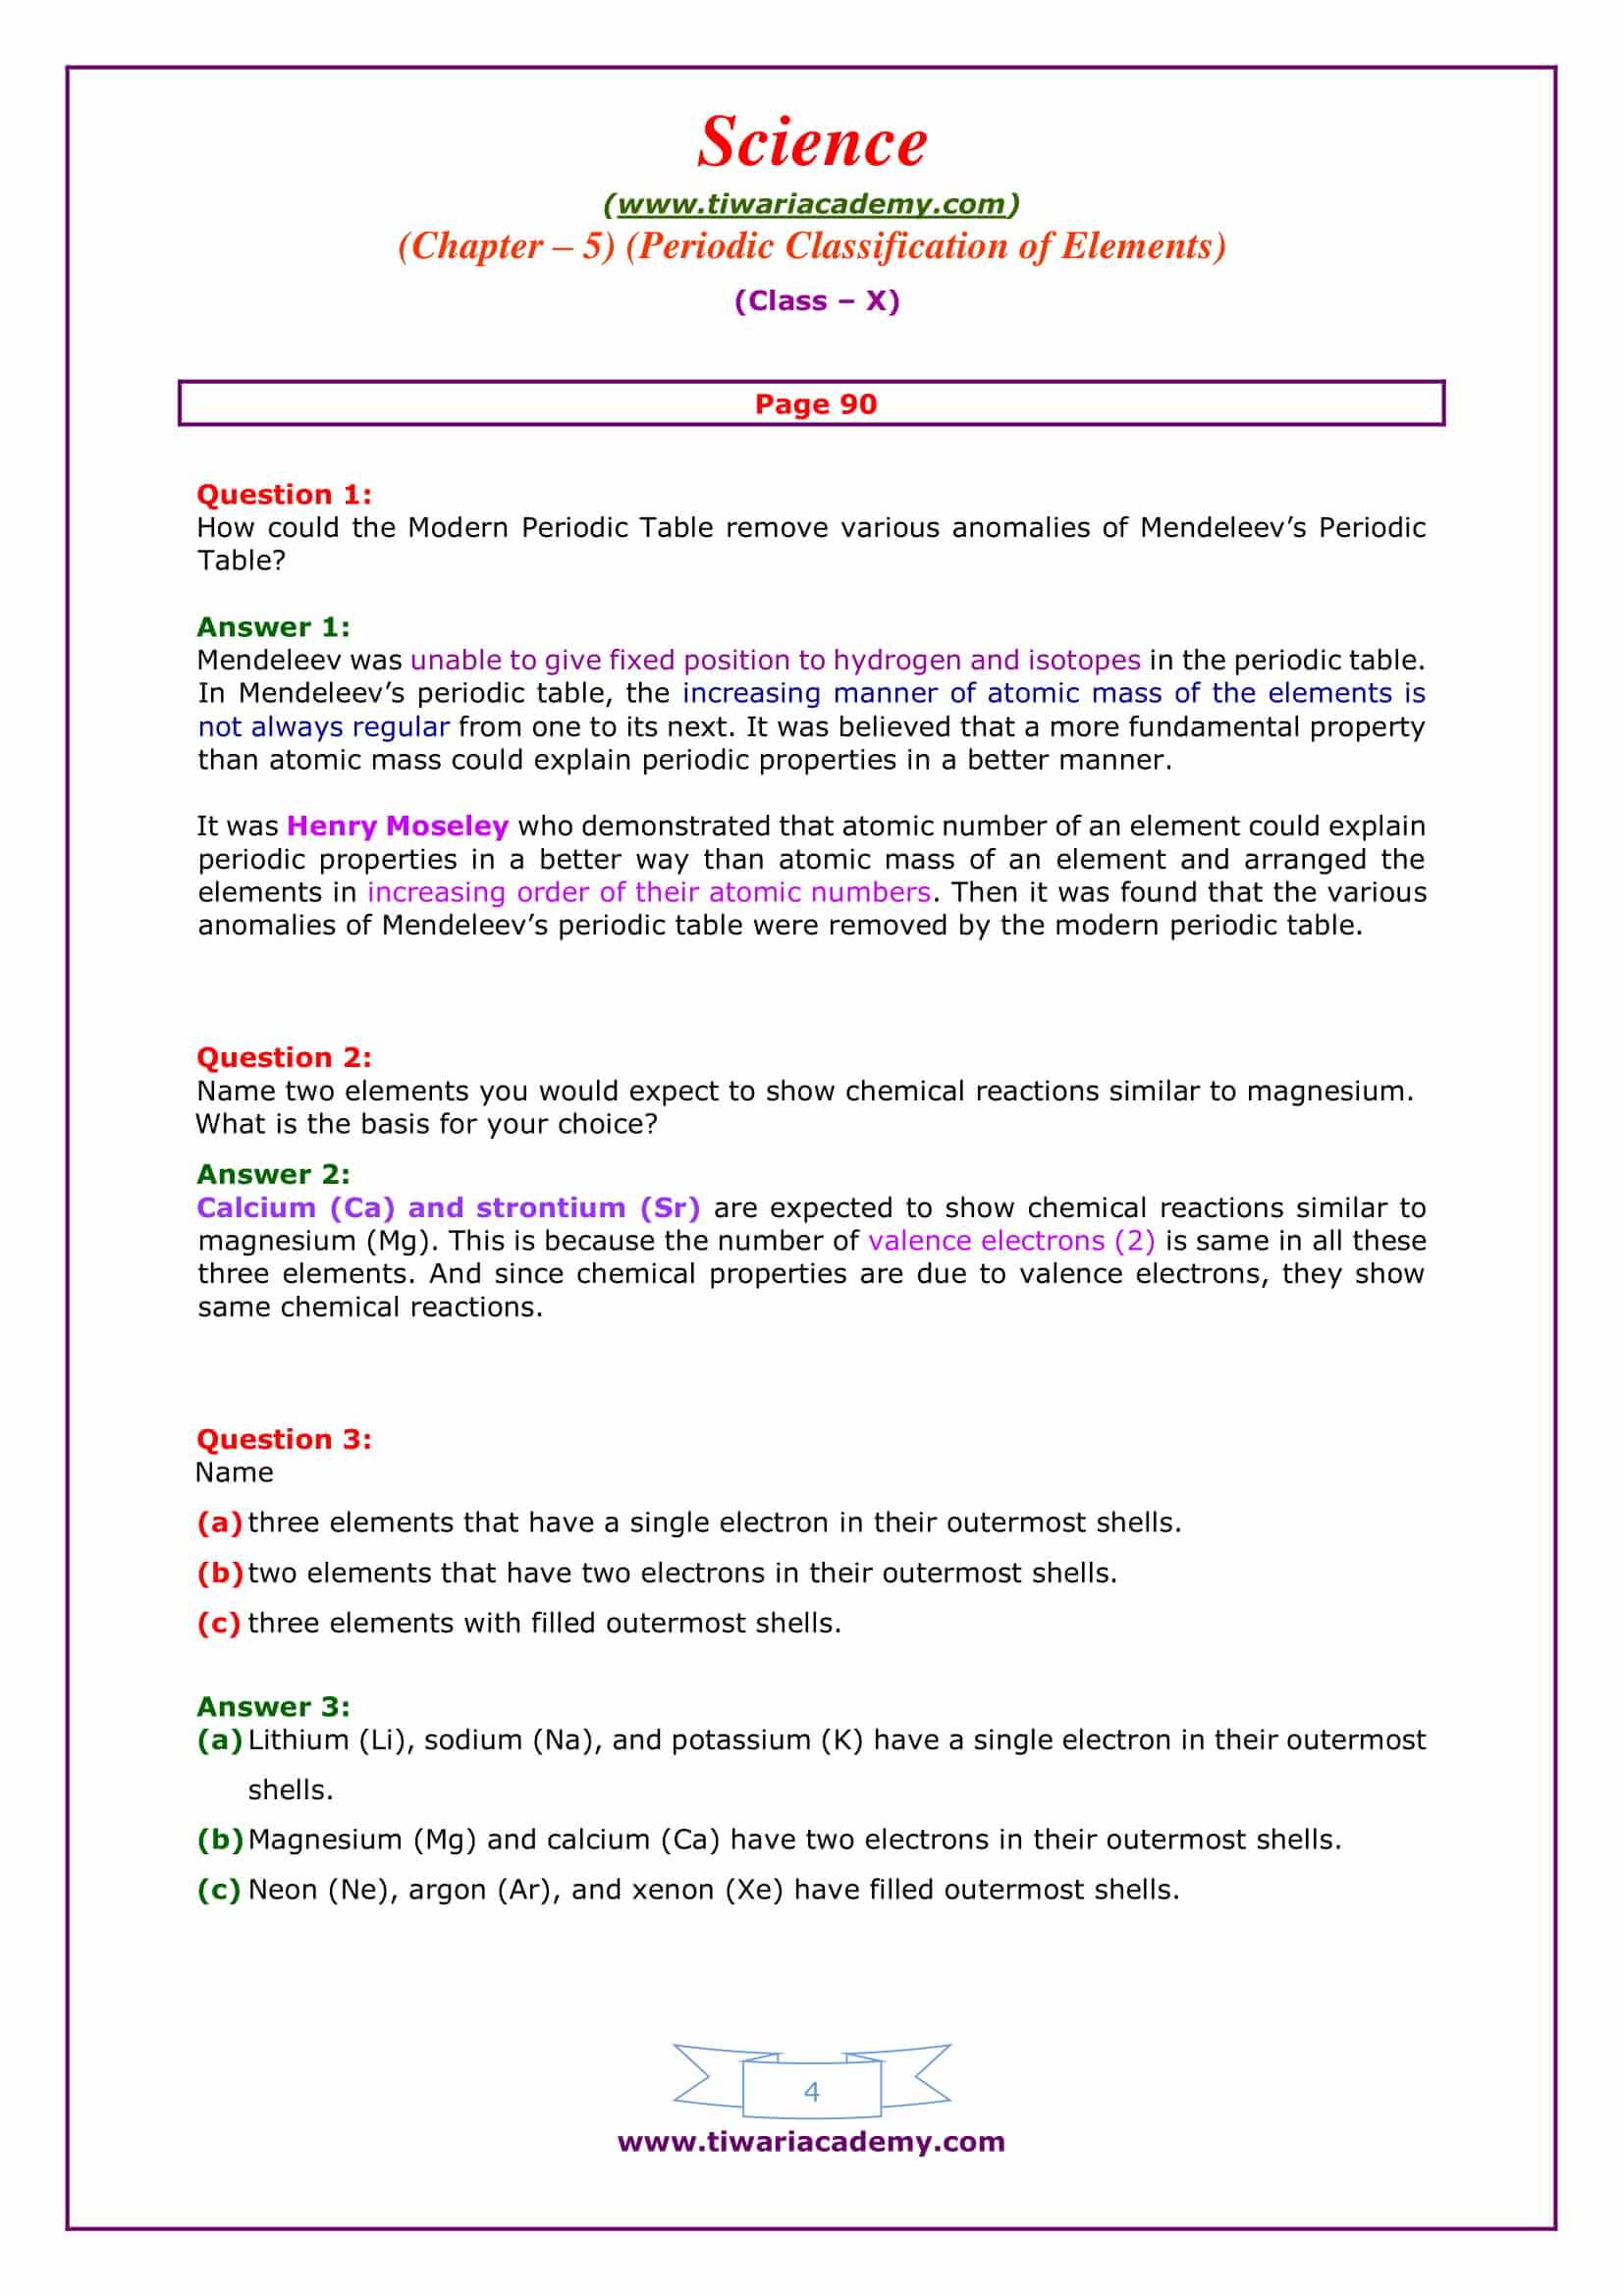 Class 10 Science Chapter 5 Periodic Classification of elements page 90 answers